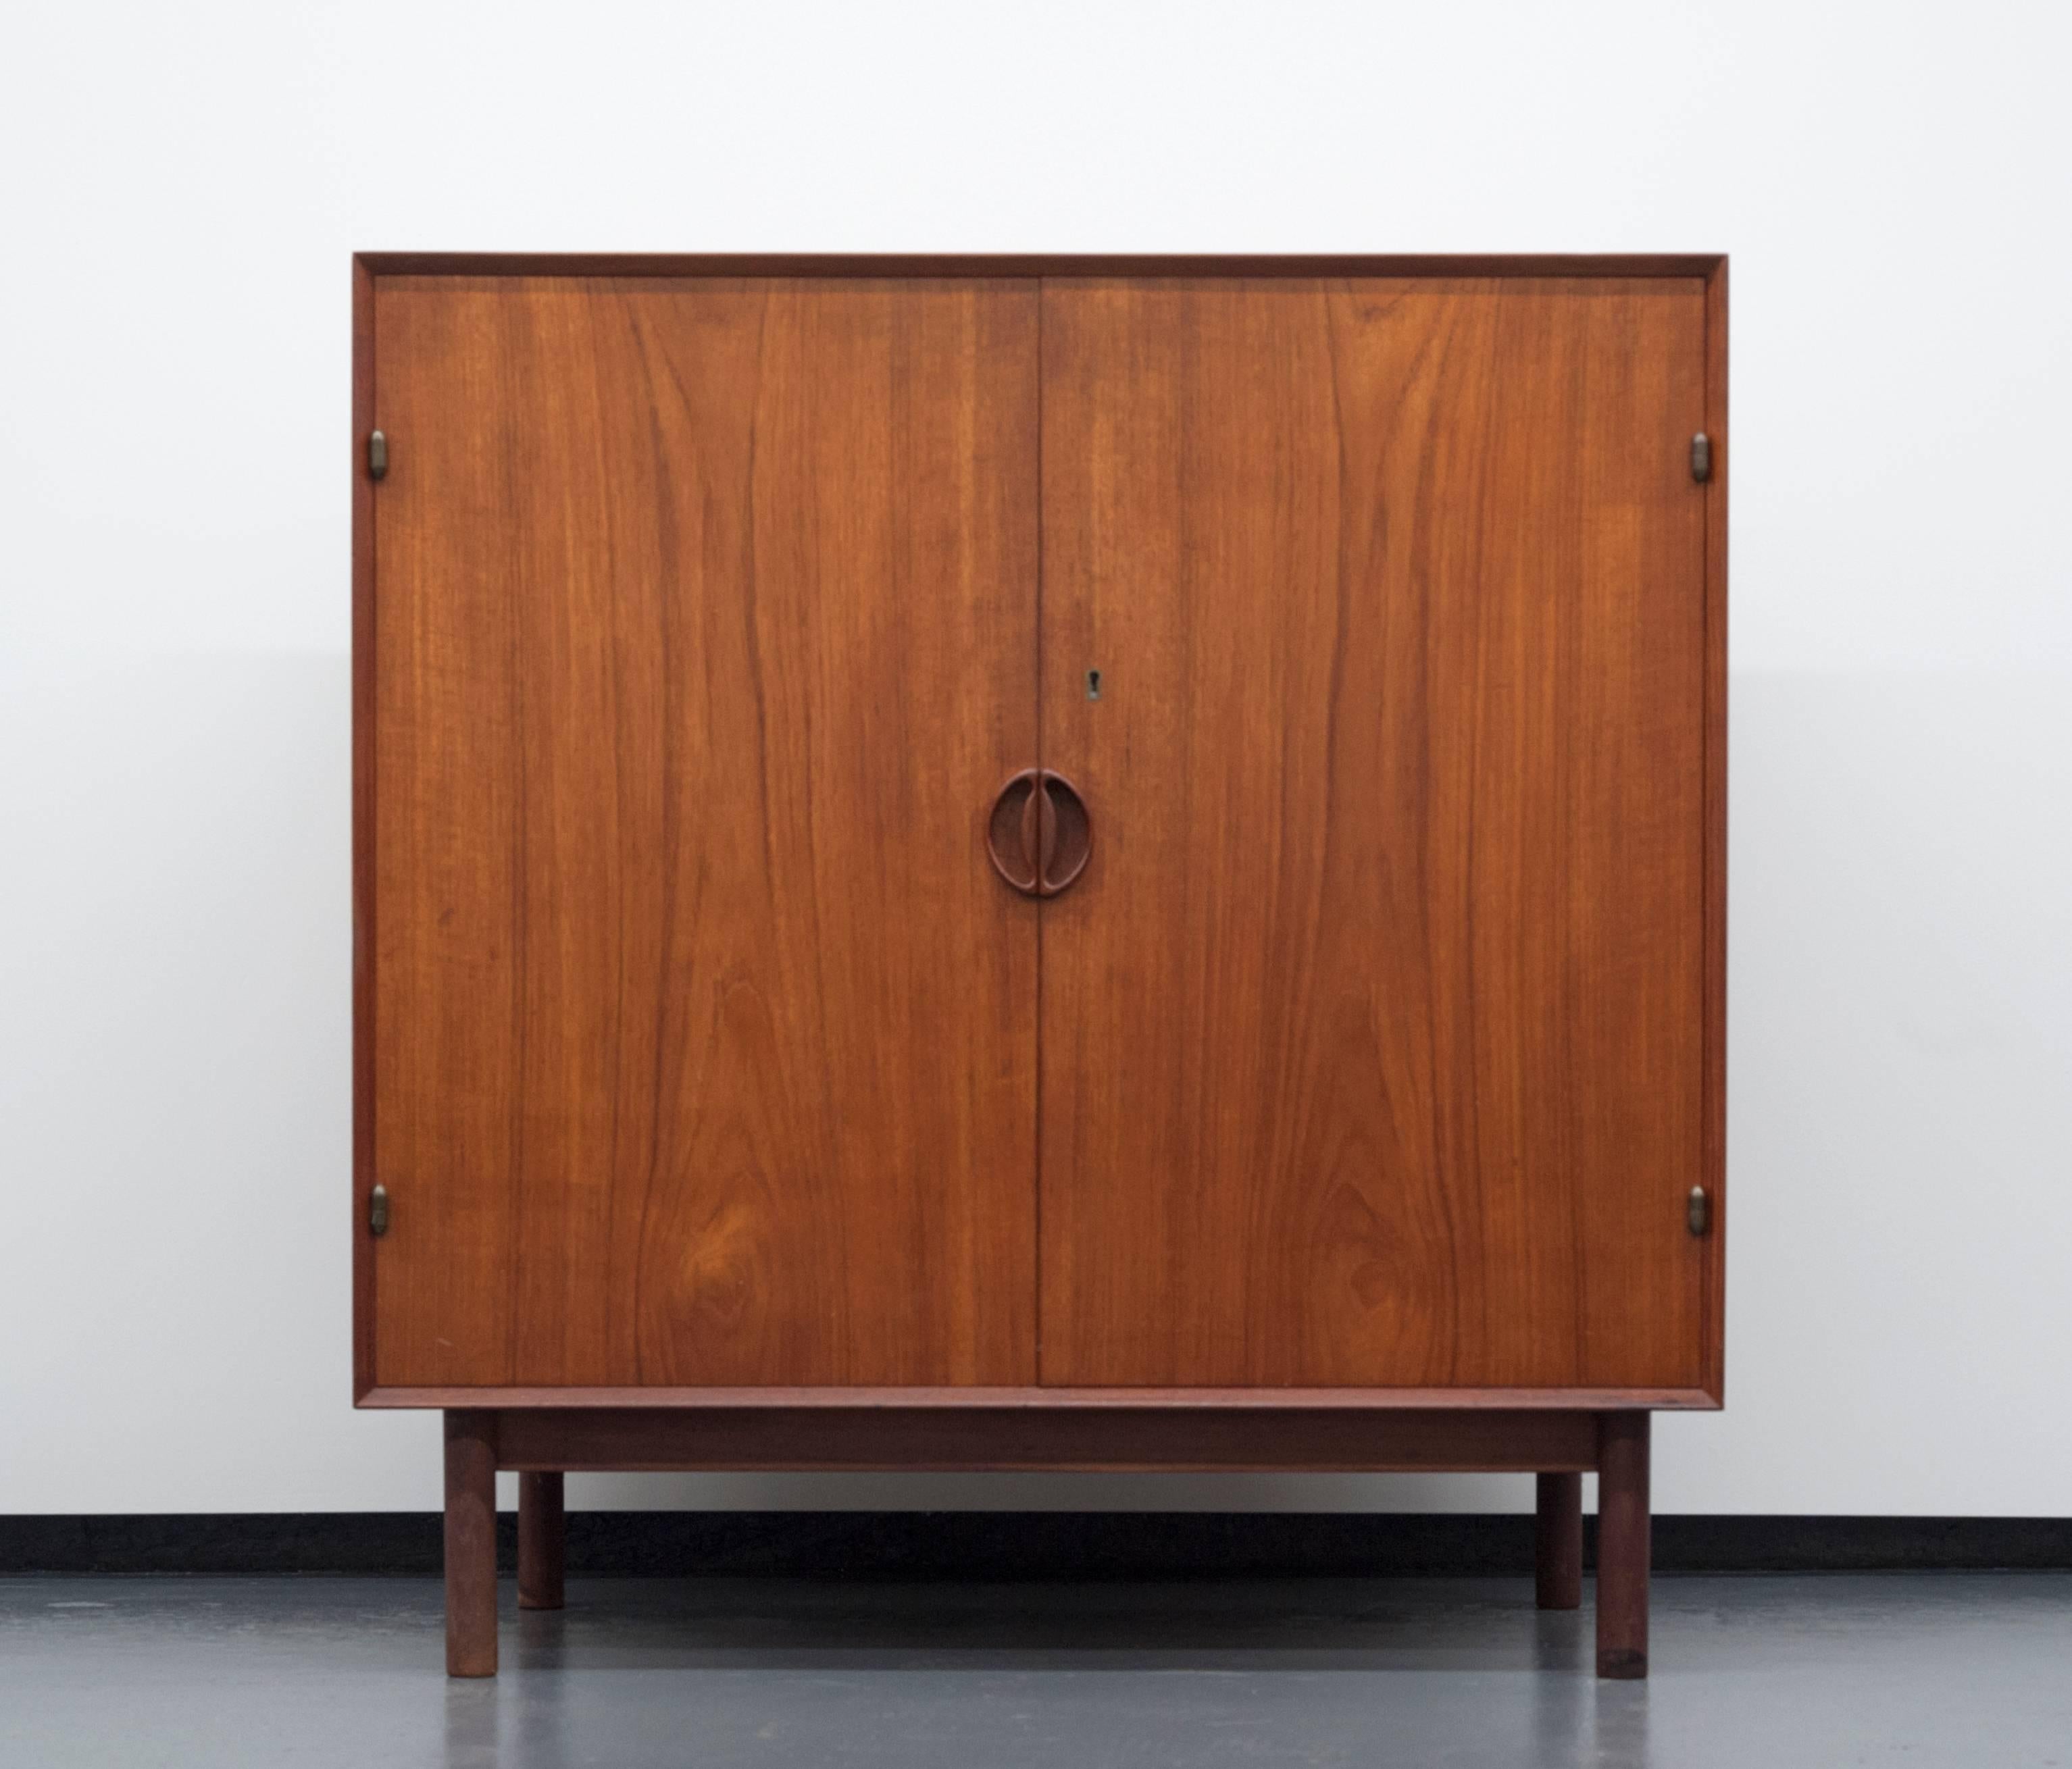 Beautiful solid teak cabinet by Peter Hvidt and Orla Mølgaard-Nielsen. Exceptional quality and functional piece. Finger joints with solid brass hardware. Original receipt dates to 1962. Two doors open to reveal three drawers and one adjustable